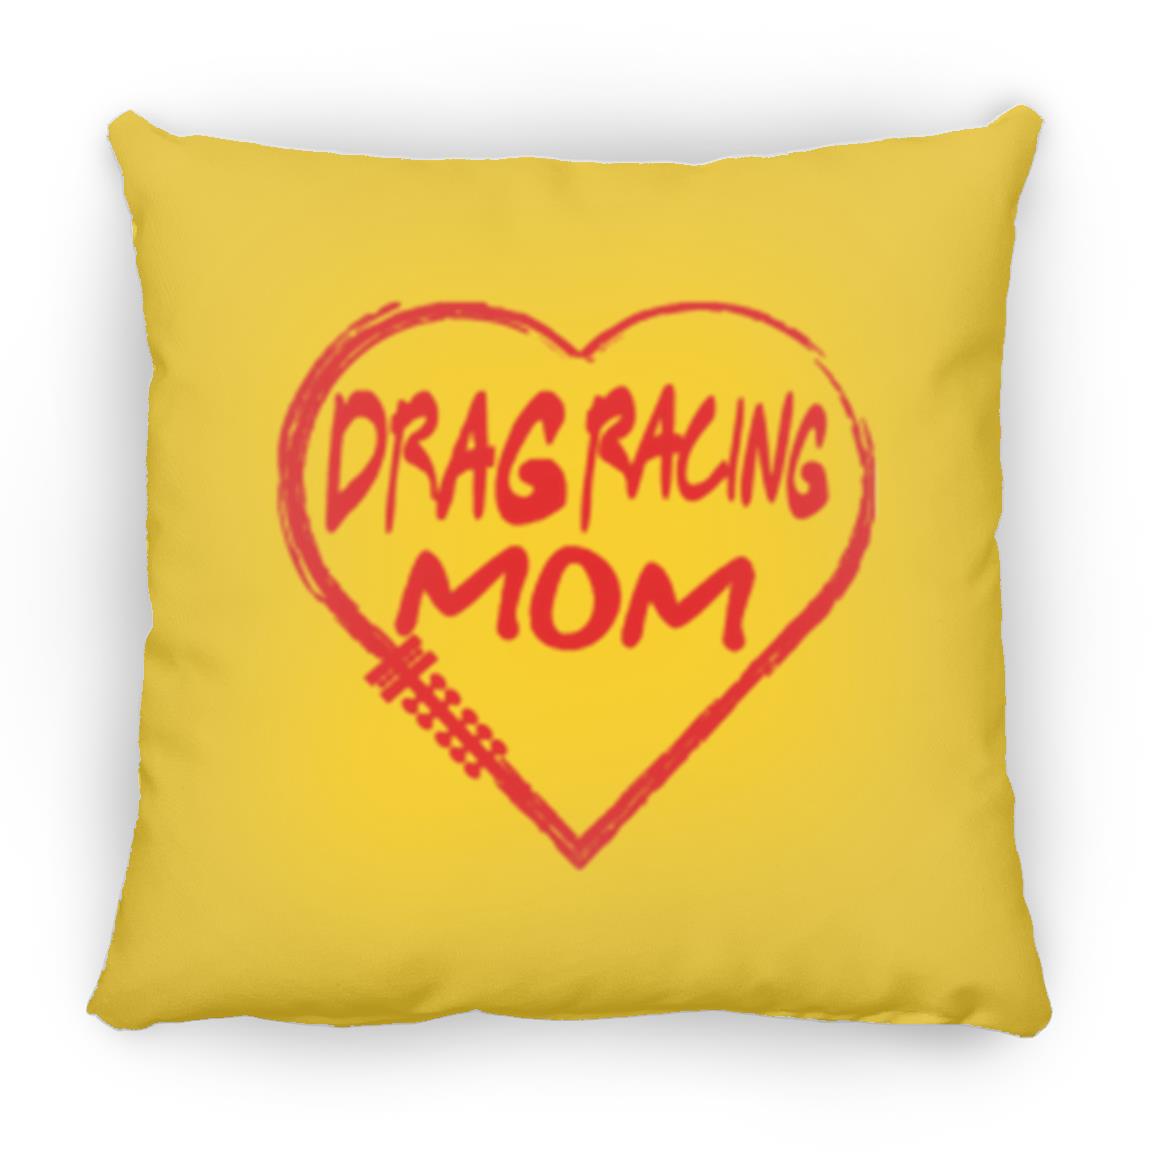 Drag Racing Mom Heart Small Square Pillow